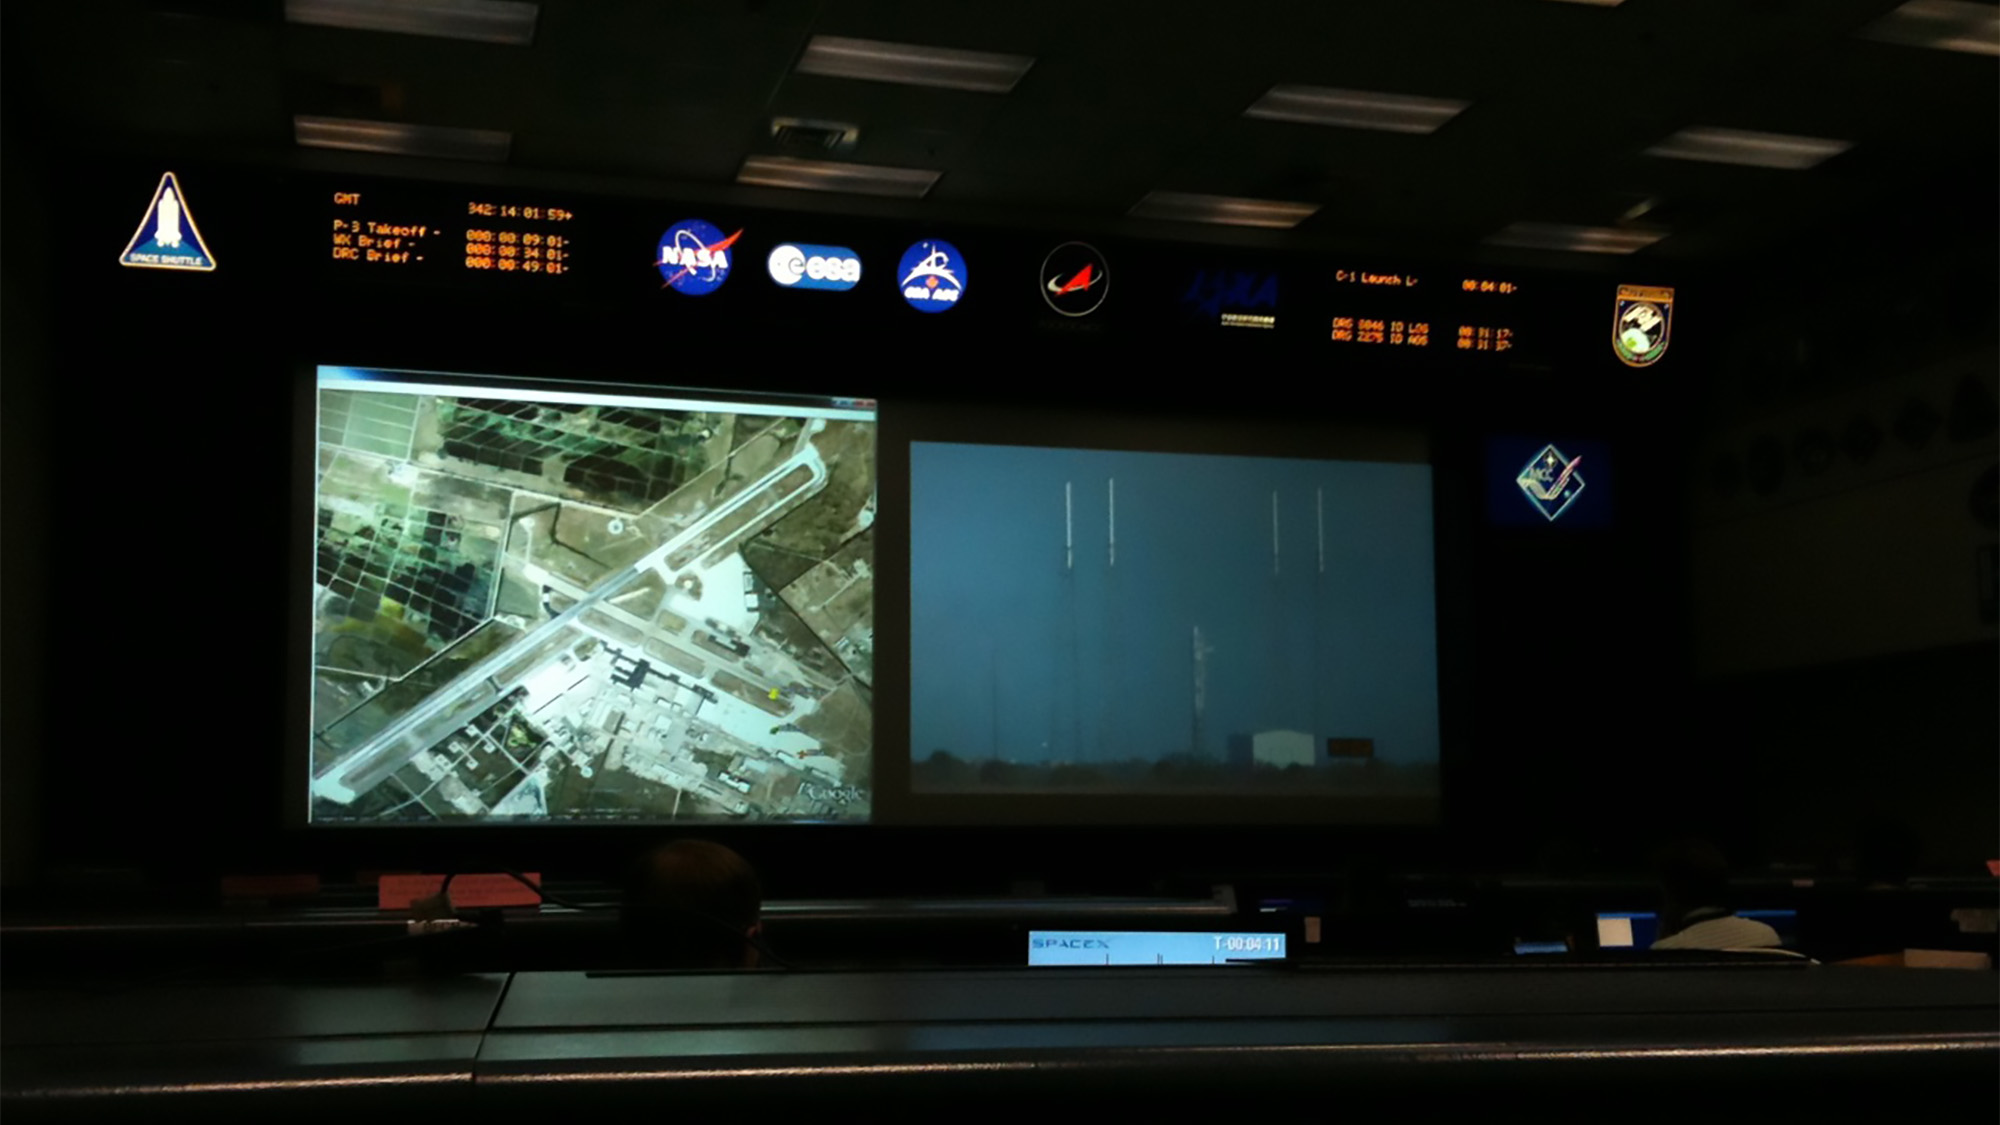 mission control display, showing an overhead view of launch site and several illuminated logos, including NASA and Spacex